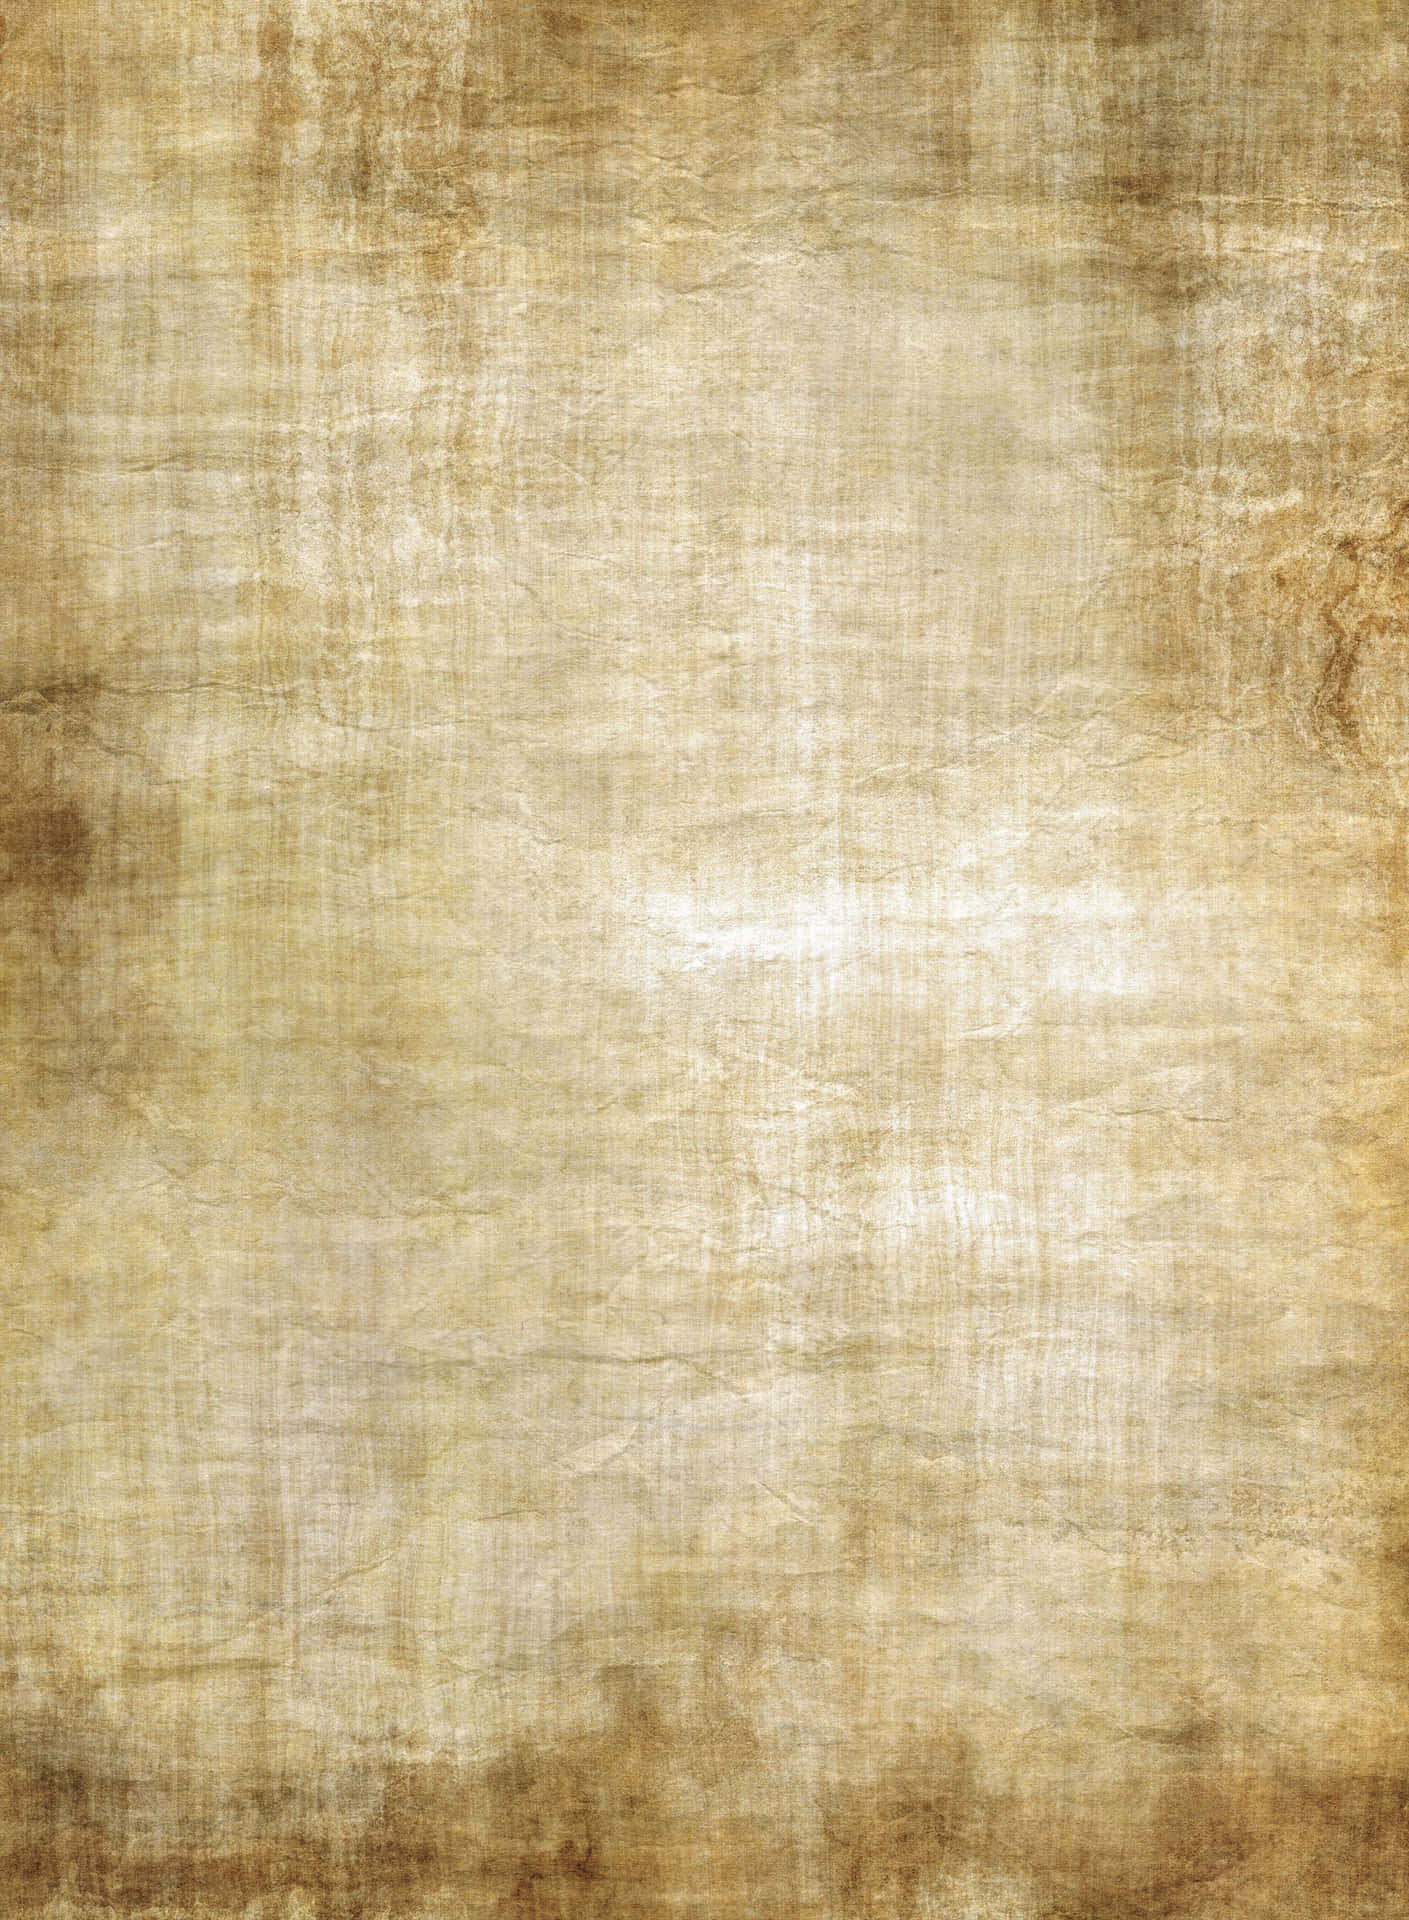 Old Paper Texture With Brown Lines Picture